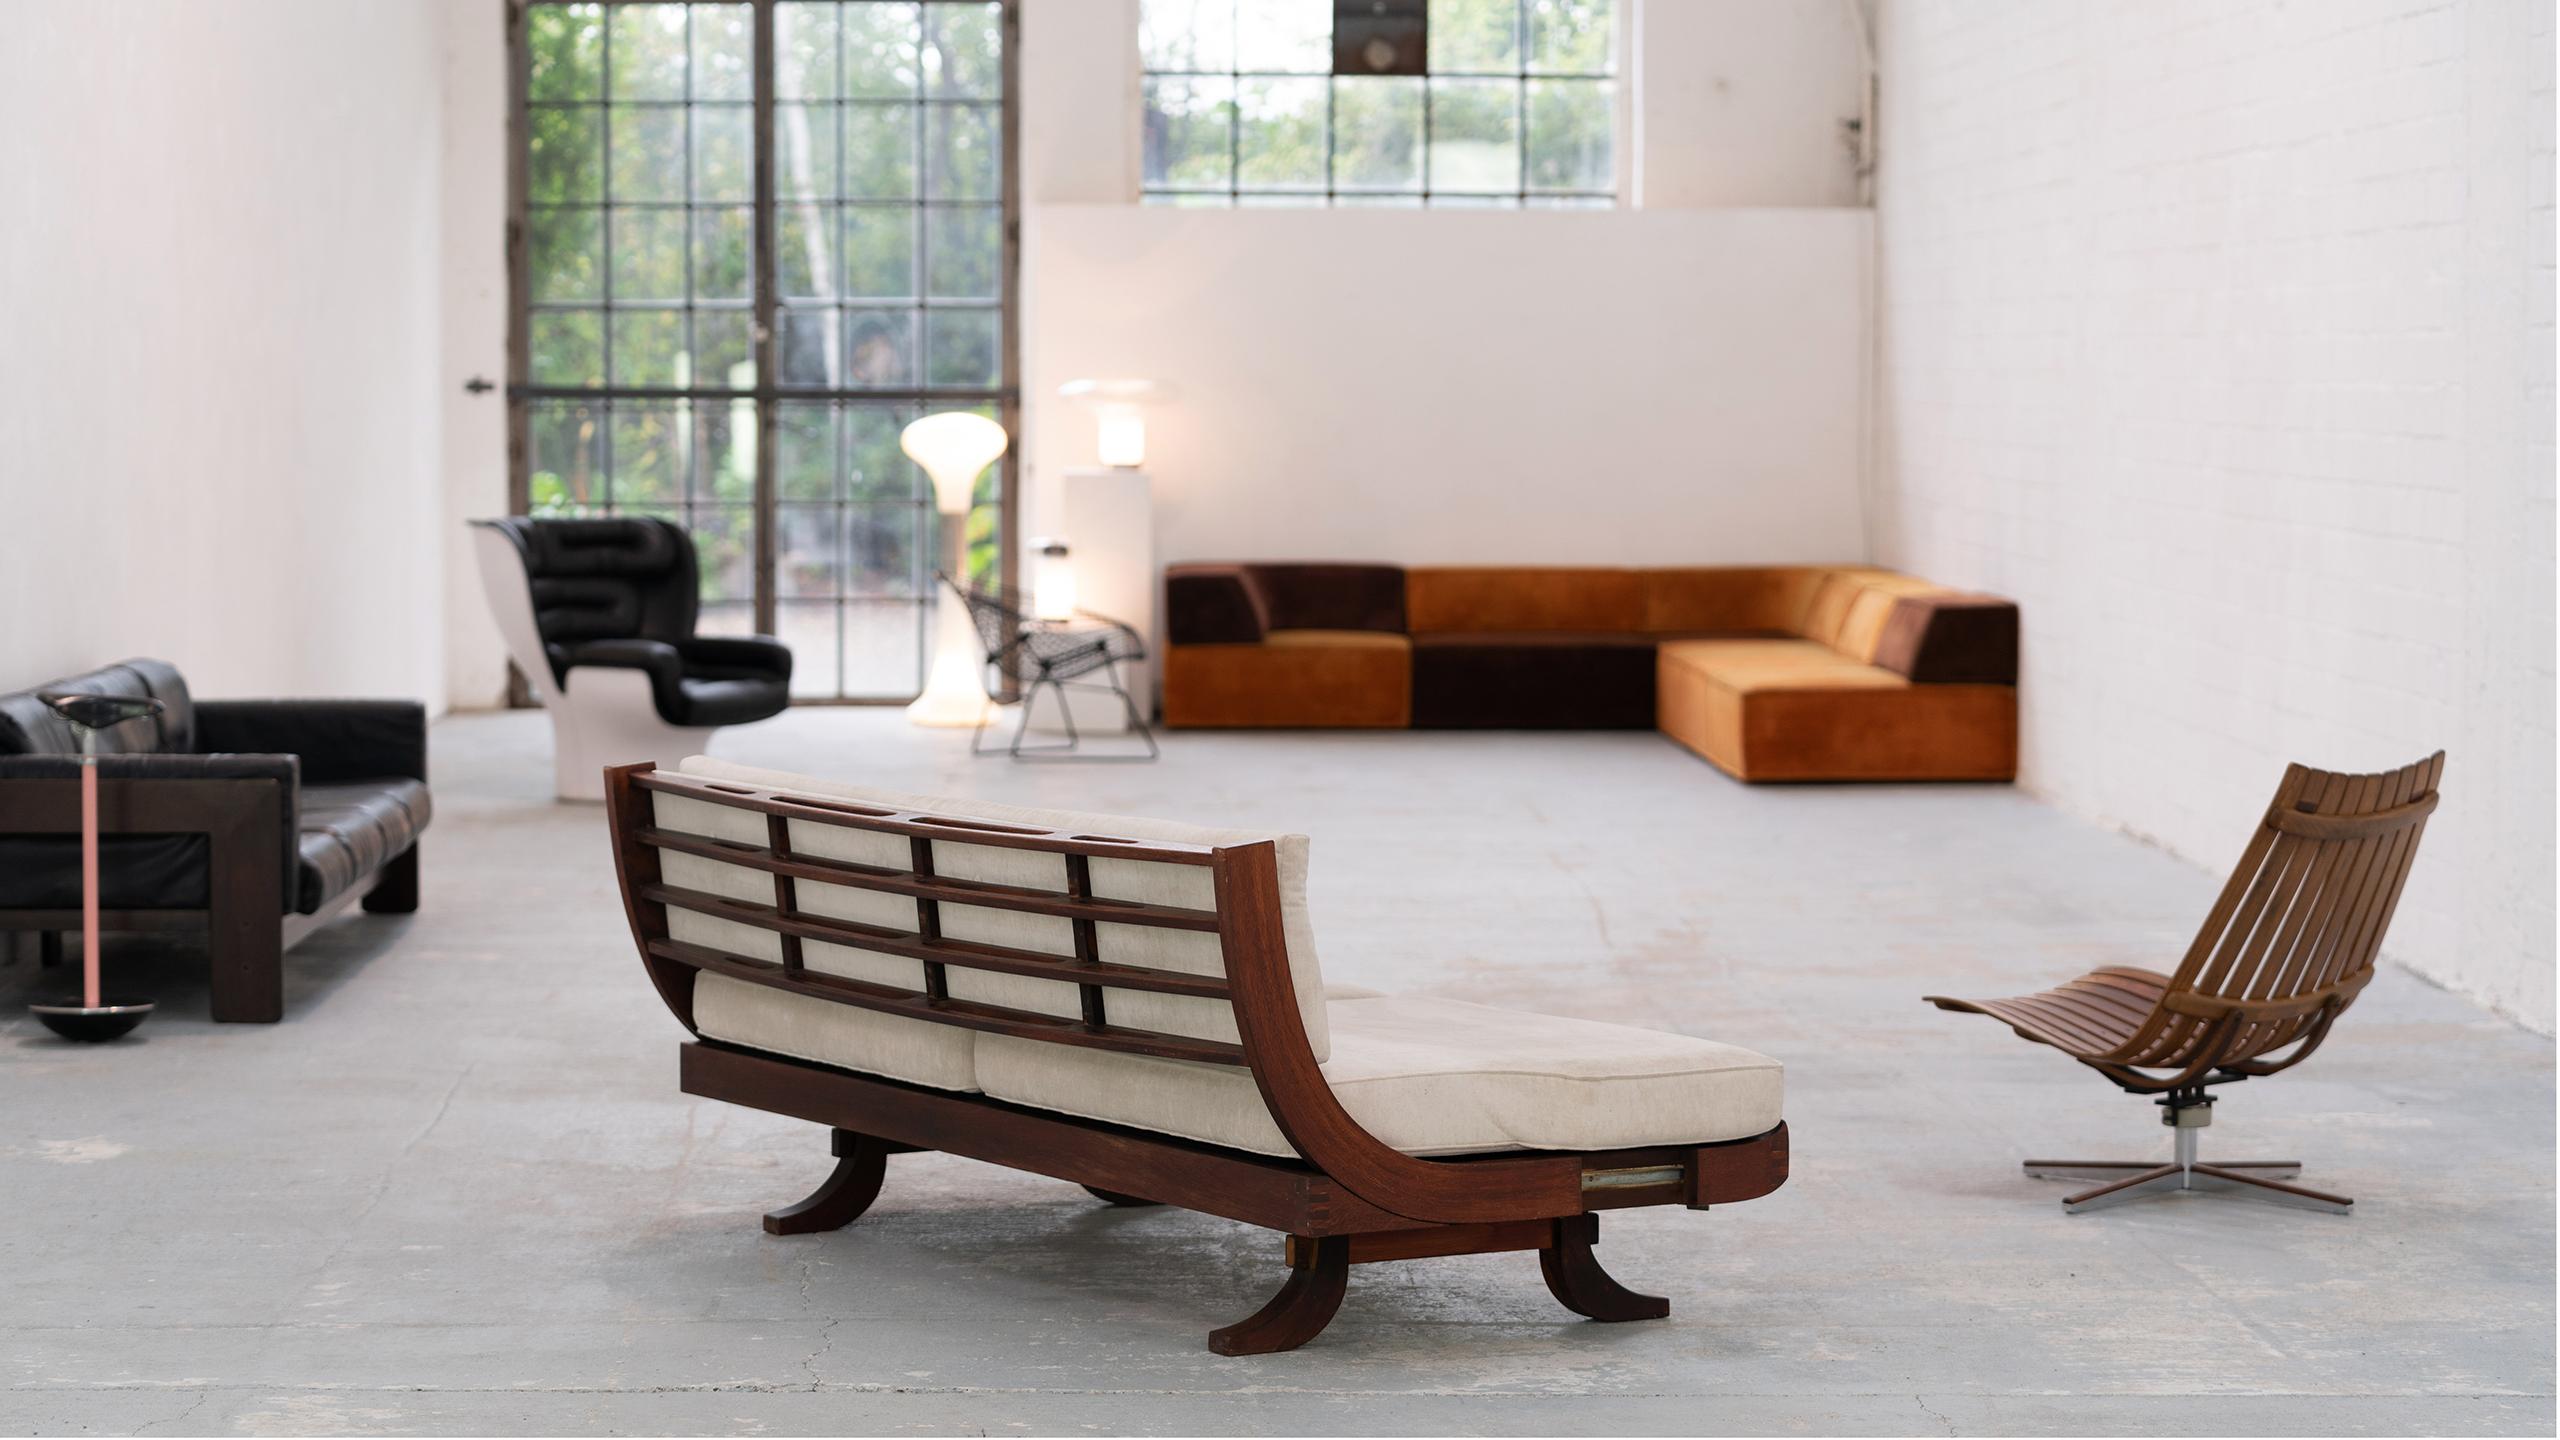 Brazilian Daybed & Sofa, 1966, Sophisticated Wood Details, Lounge & Relax 14